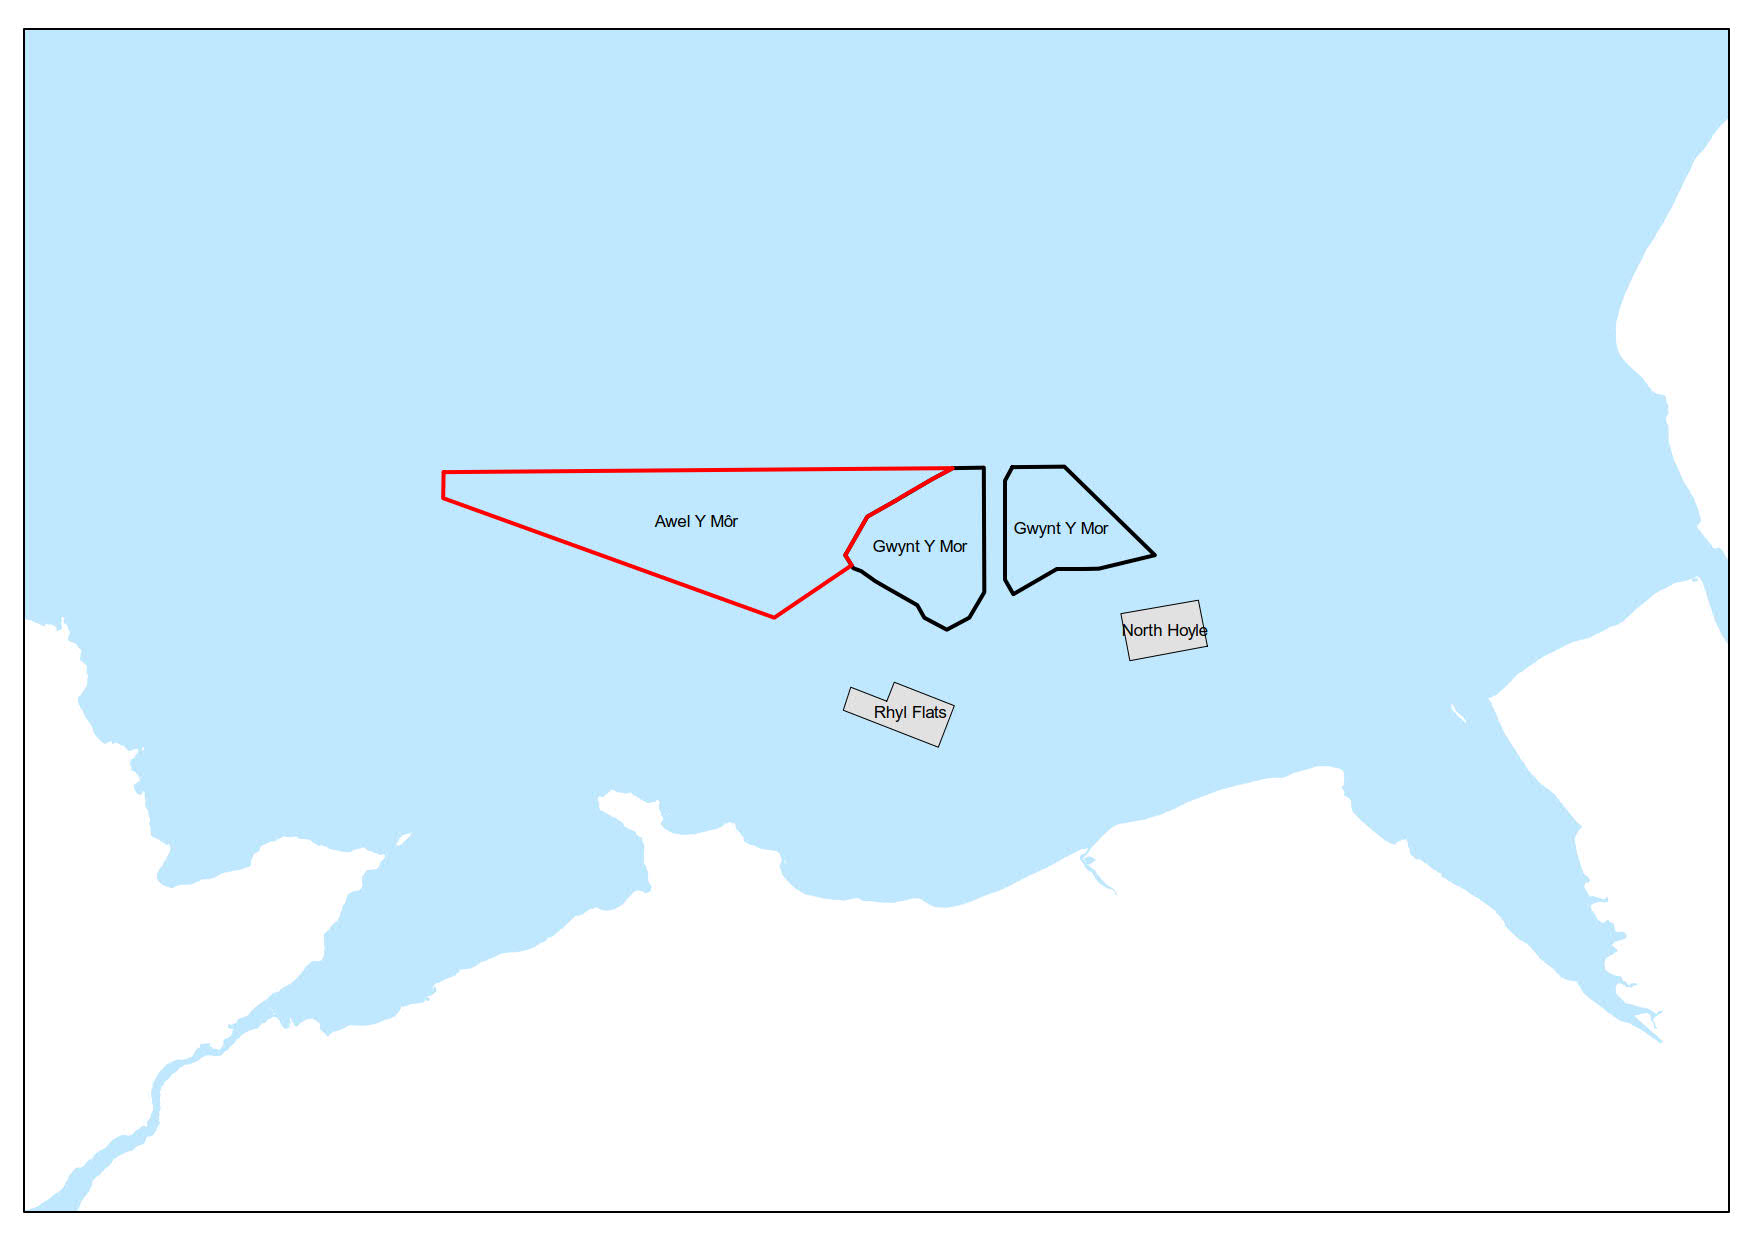 Map showing location of the Awel y Mor offshore wind farm in respect to the existing Gwynt y Mor